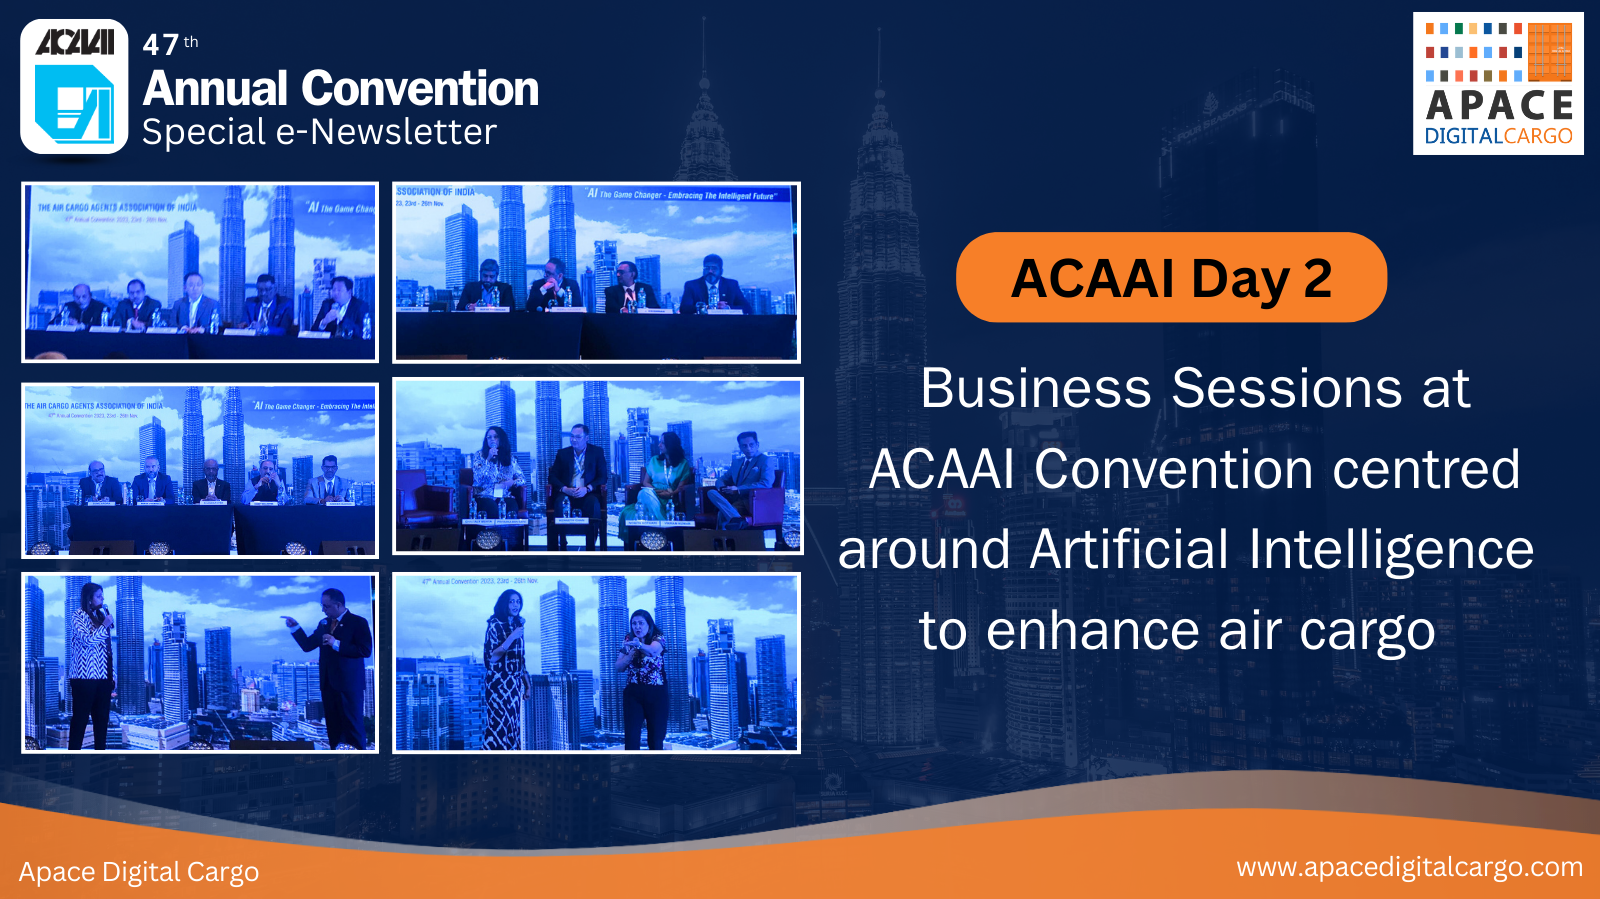 ACAAI Day 2 - Business Sessions at ACAAI Convention centred around Artificial Intelligence to enhance air cargo